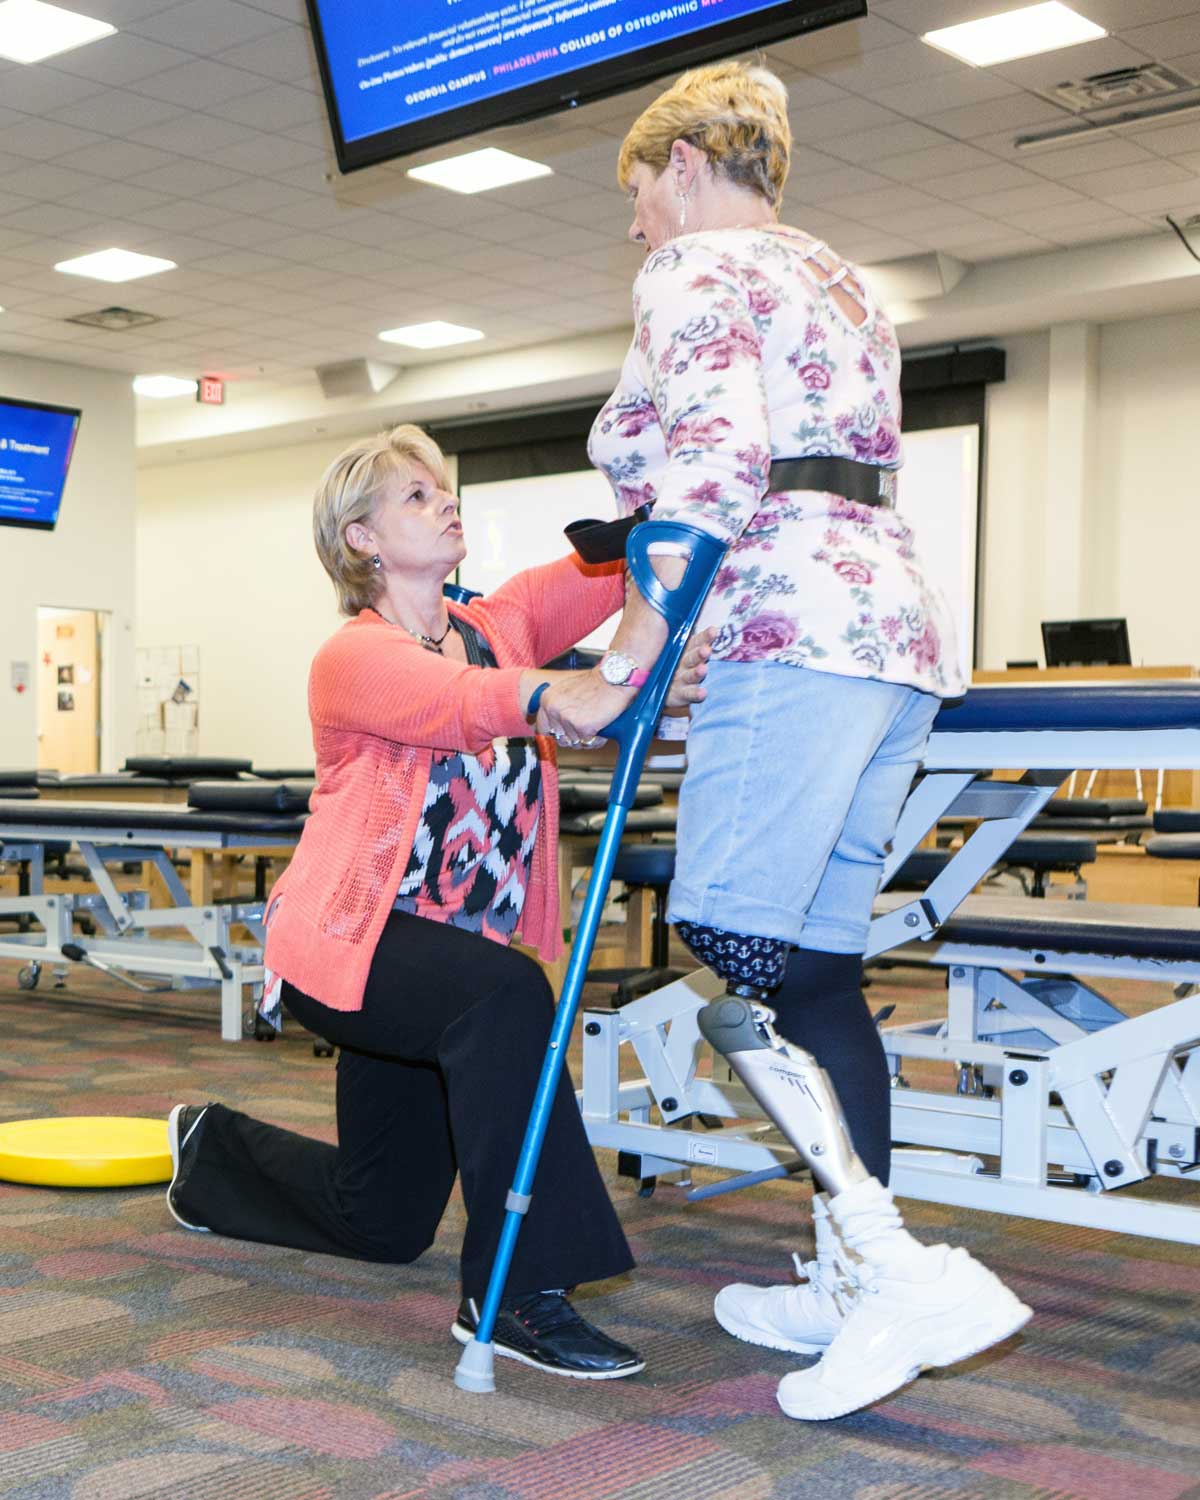 A physical therapist helps a ptient with exercises. The physical demands as well as salary are factors to consider when deciding to choose a career in physical therapy.